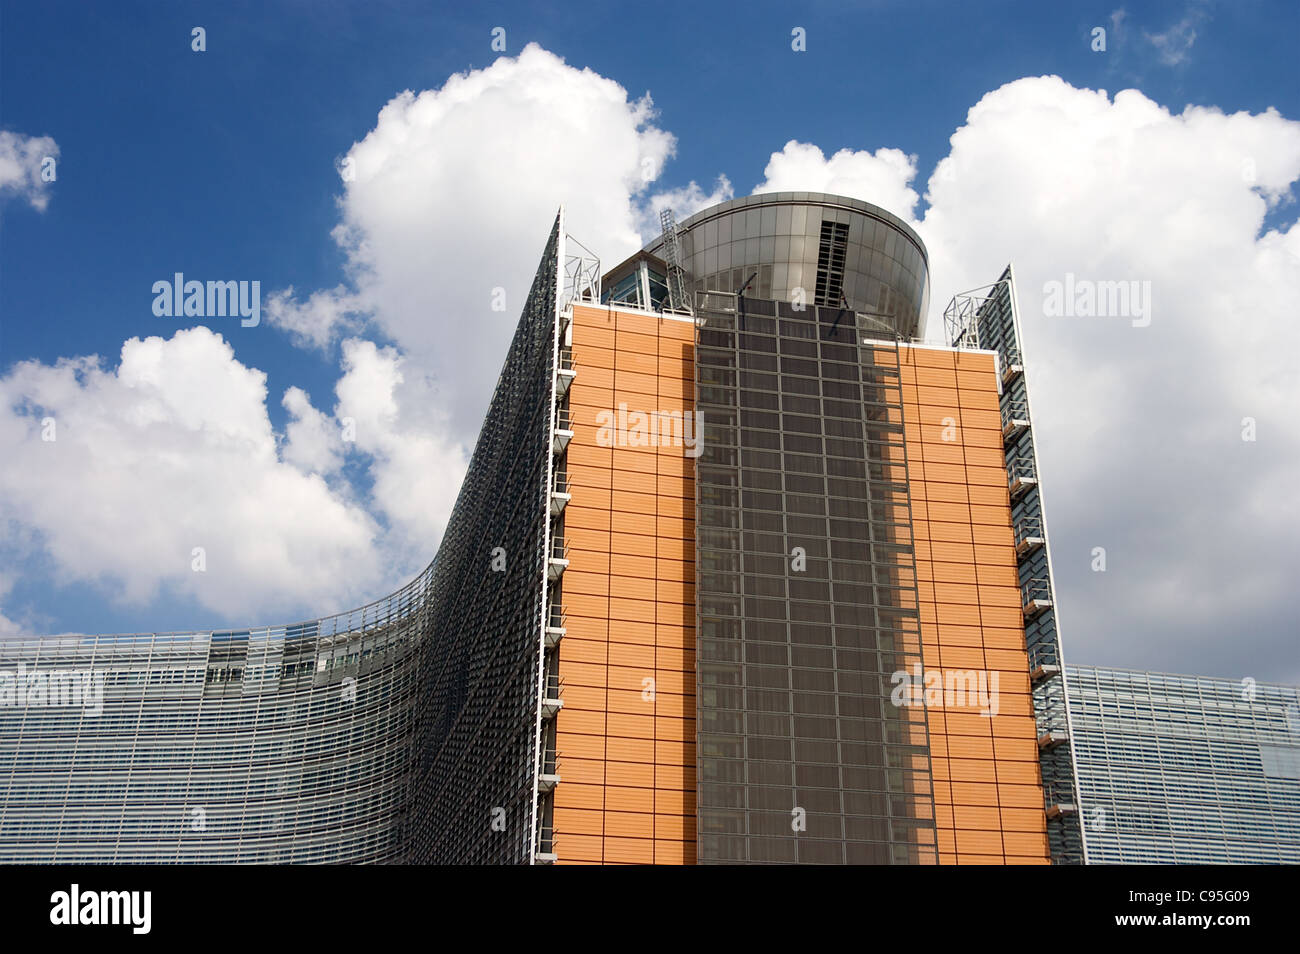 The Berlaymont building, which houses the headquarters of the European Commission, Brussels, Belgium Stock Photo